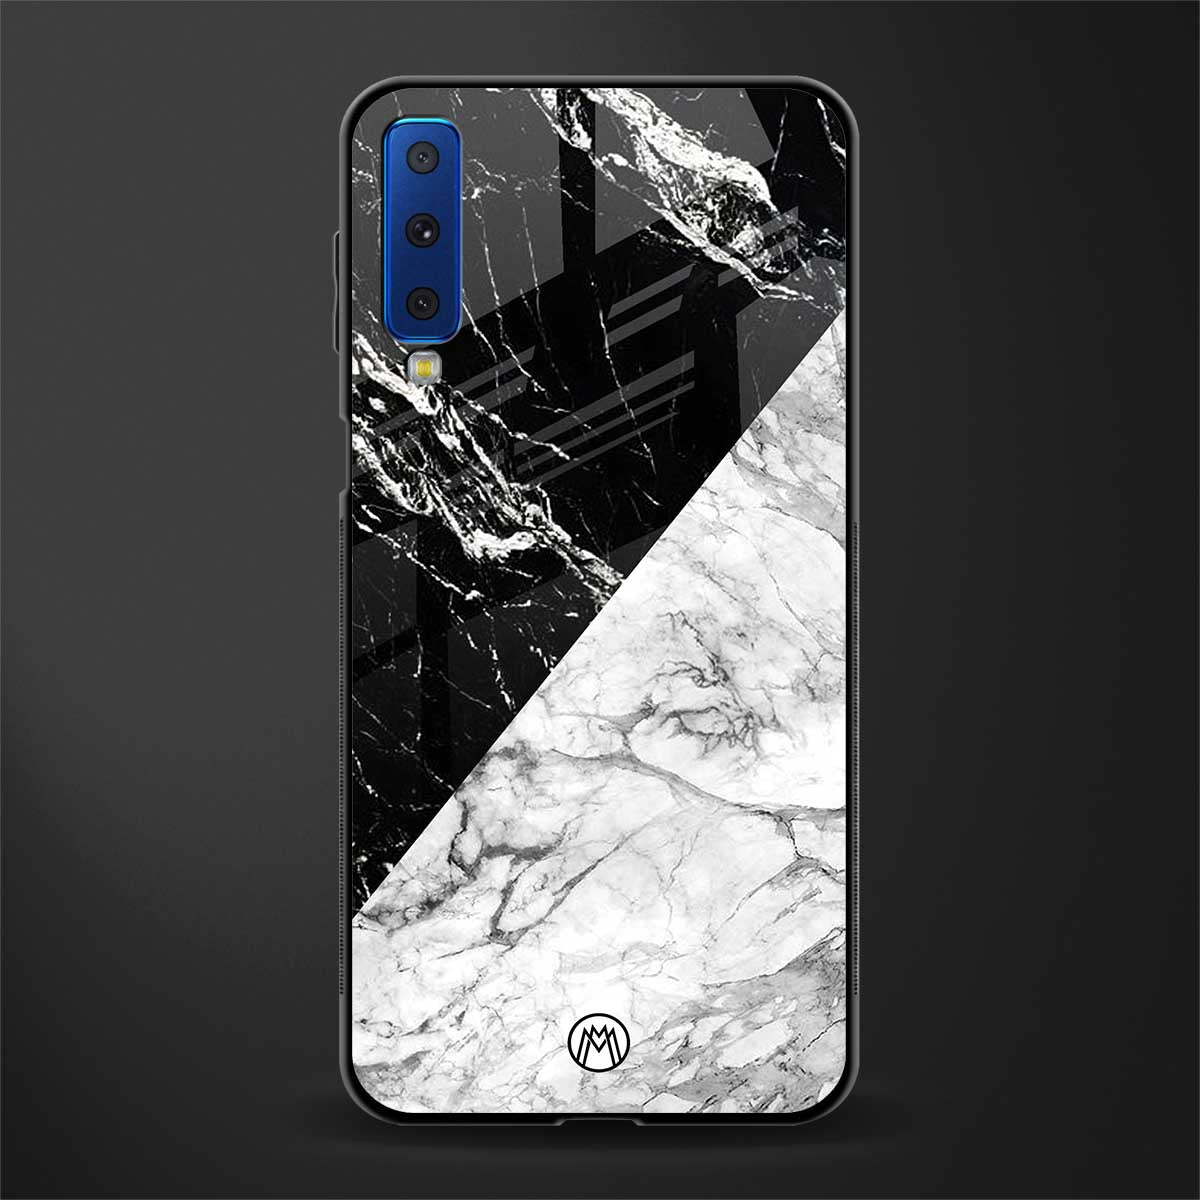 fatal contradiction phone cover for samsung galaxy a7 2018